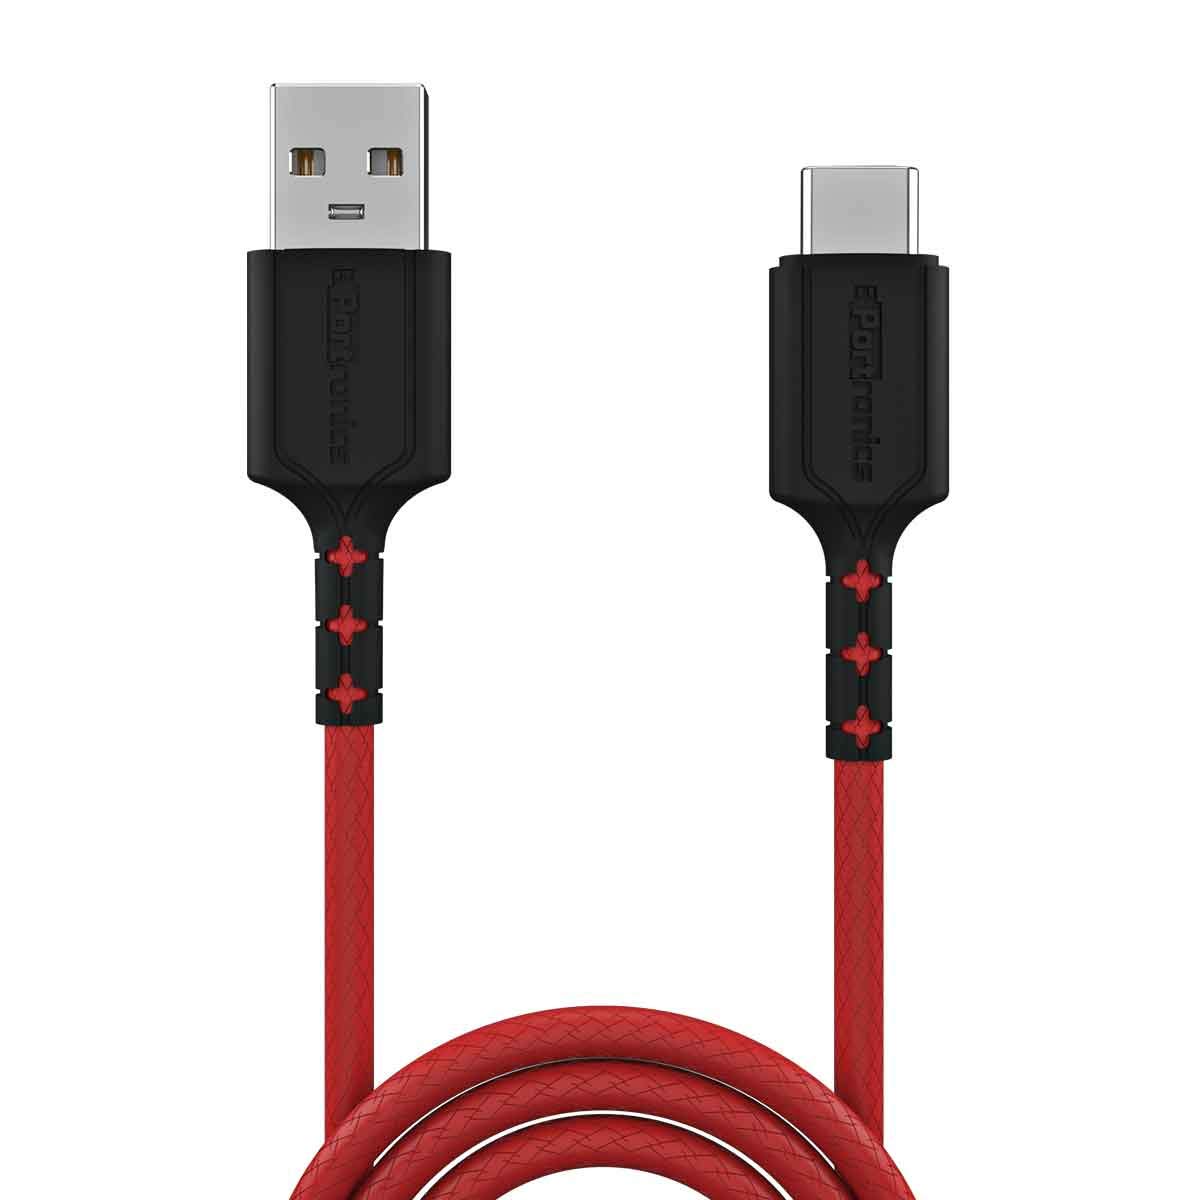 Portronics Konnect Dash USB Type C Cable 5A POR-1293 for Smartphones (Red)